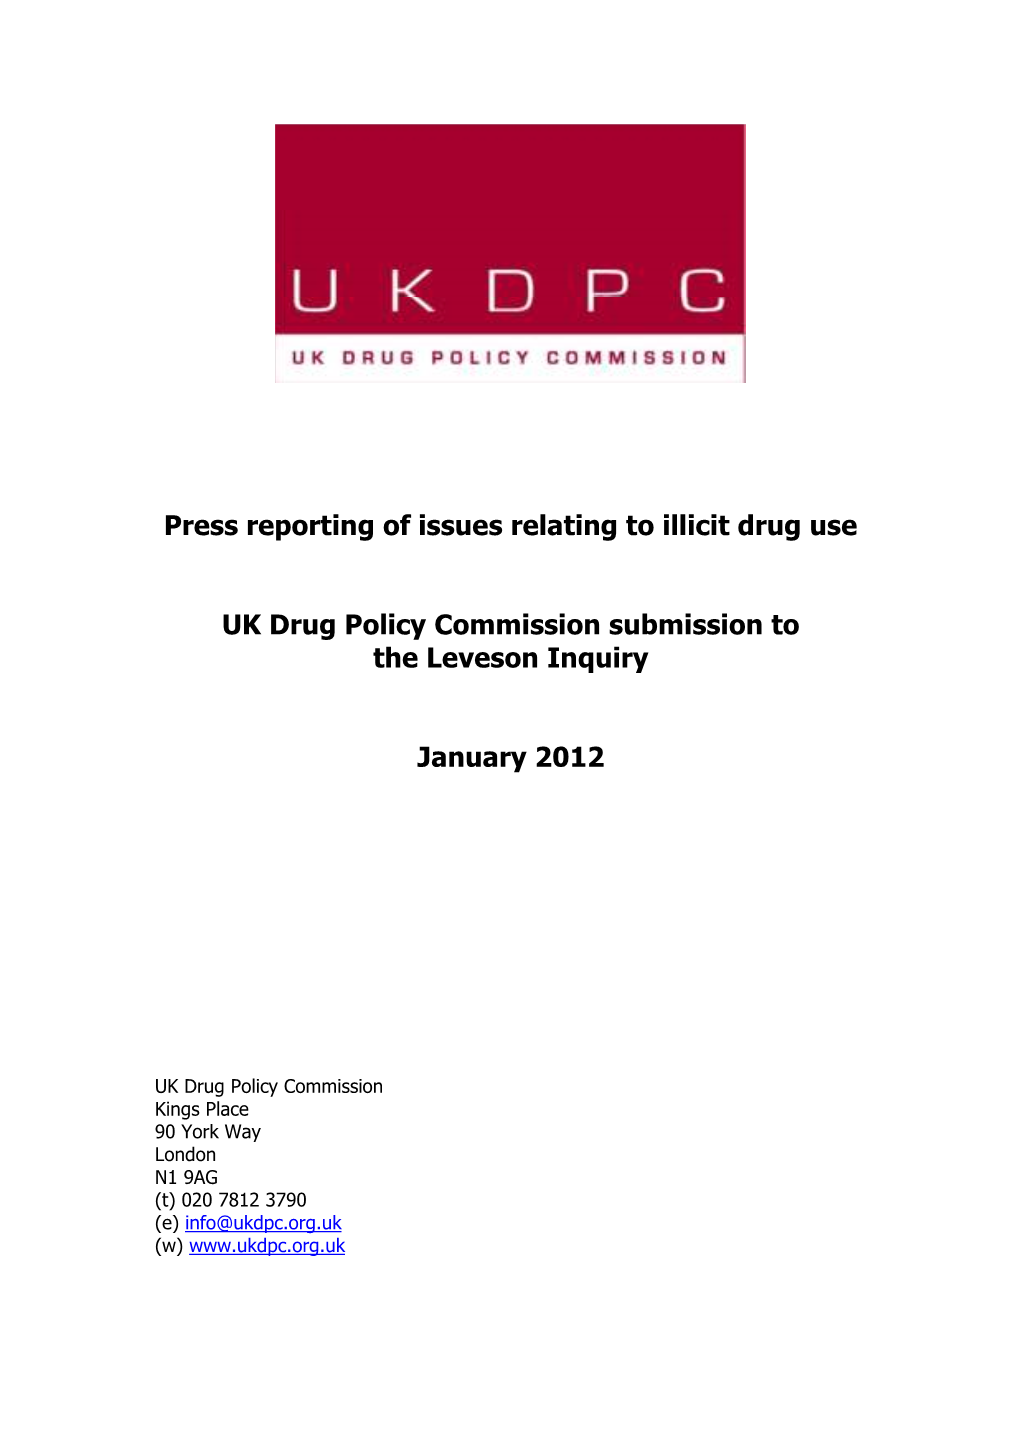 Press Reporting of Issues Relating to Illicit Drug Use UK Drug Policy